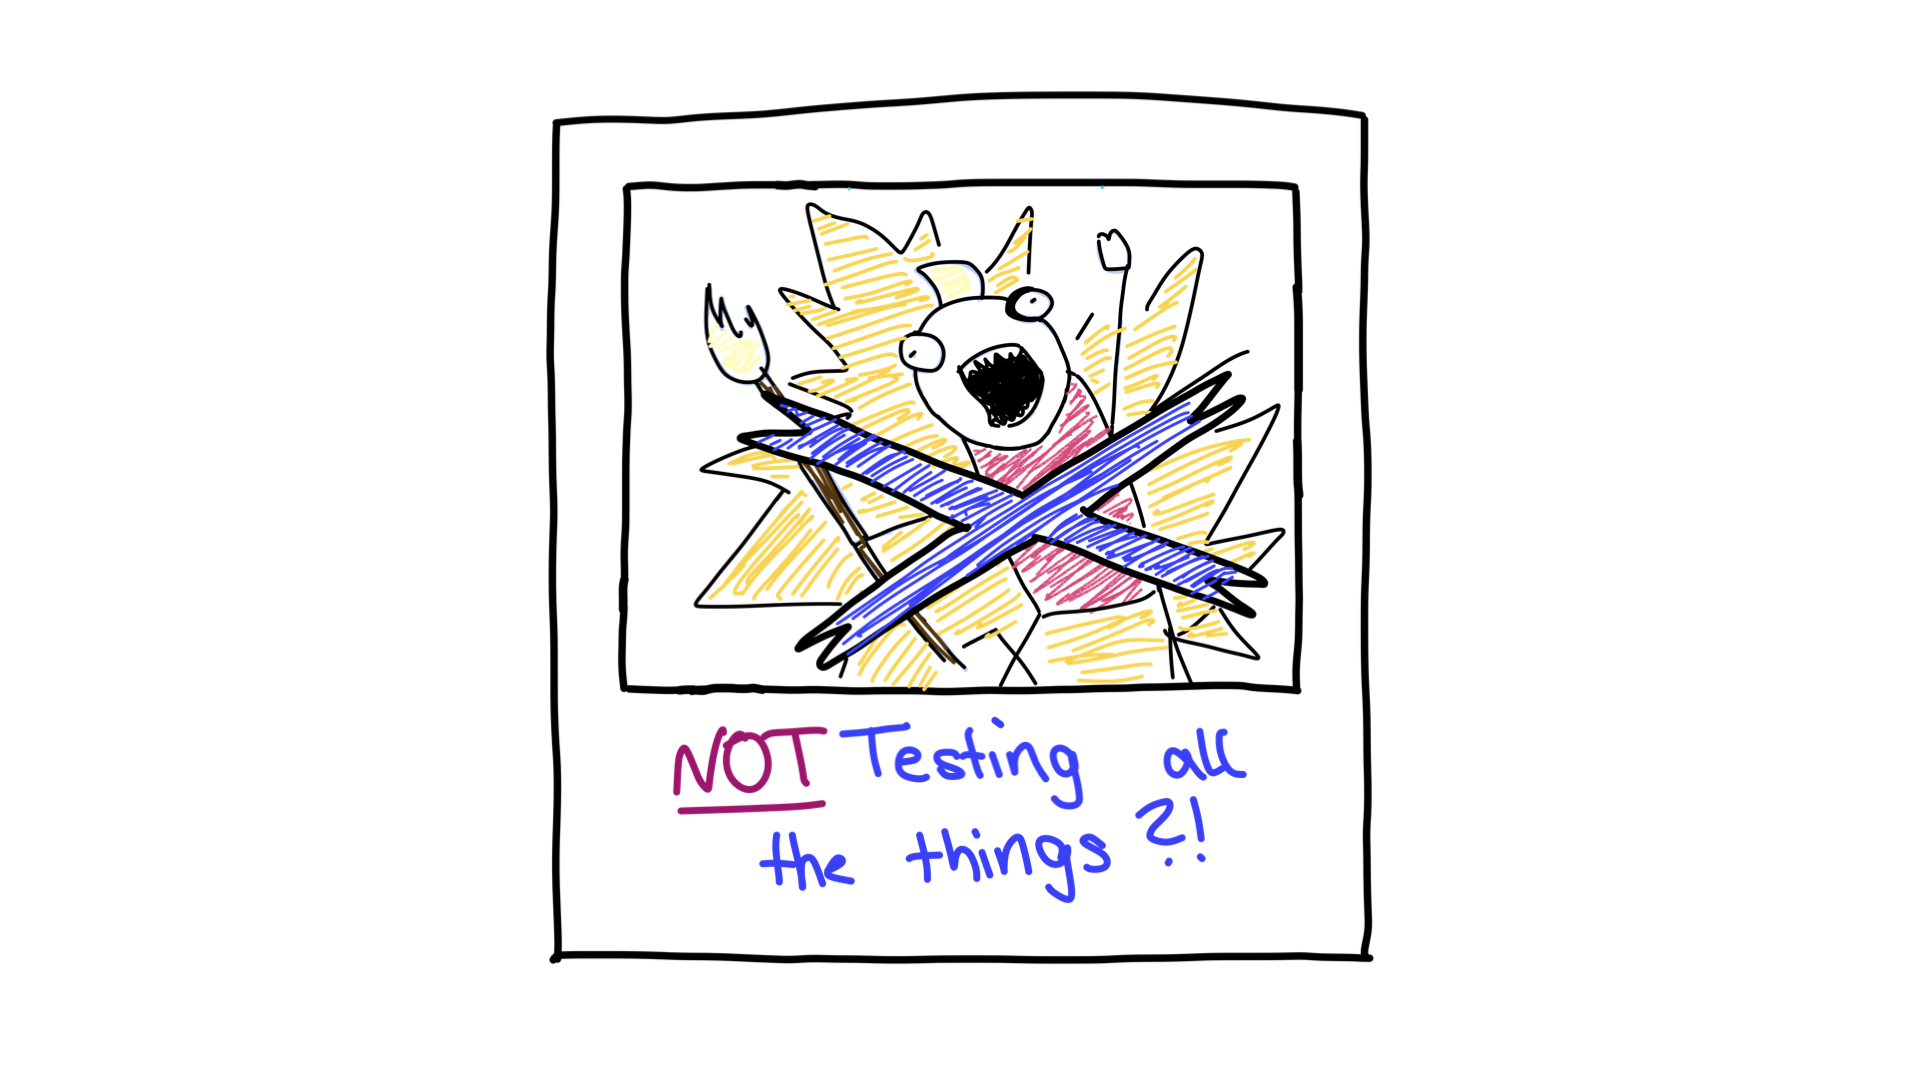 Don't test all the things.